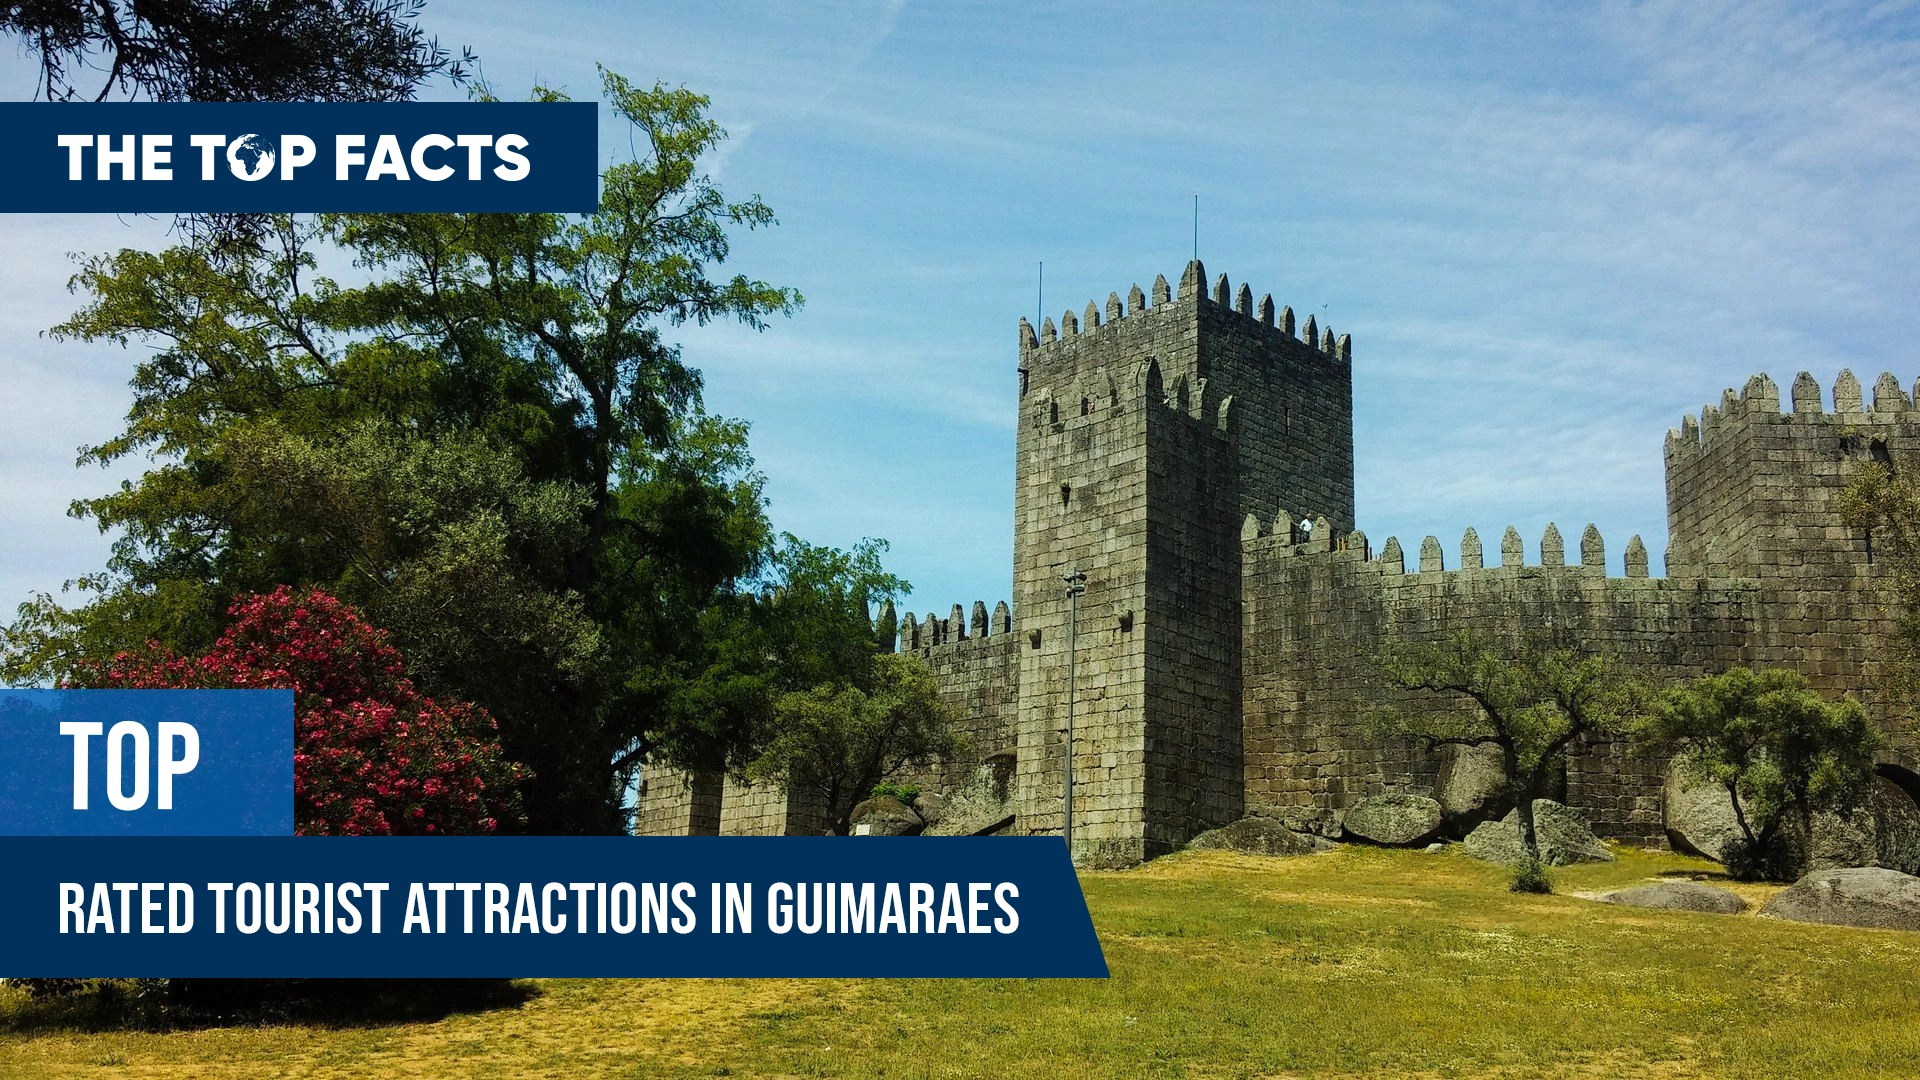 Discover the Best Sightseeing Spots in Guimaraes